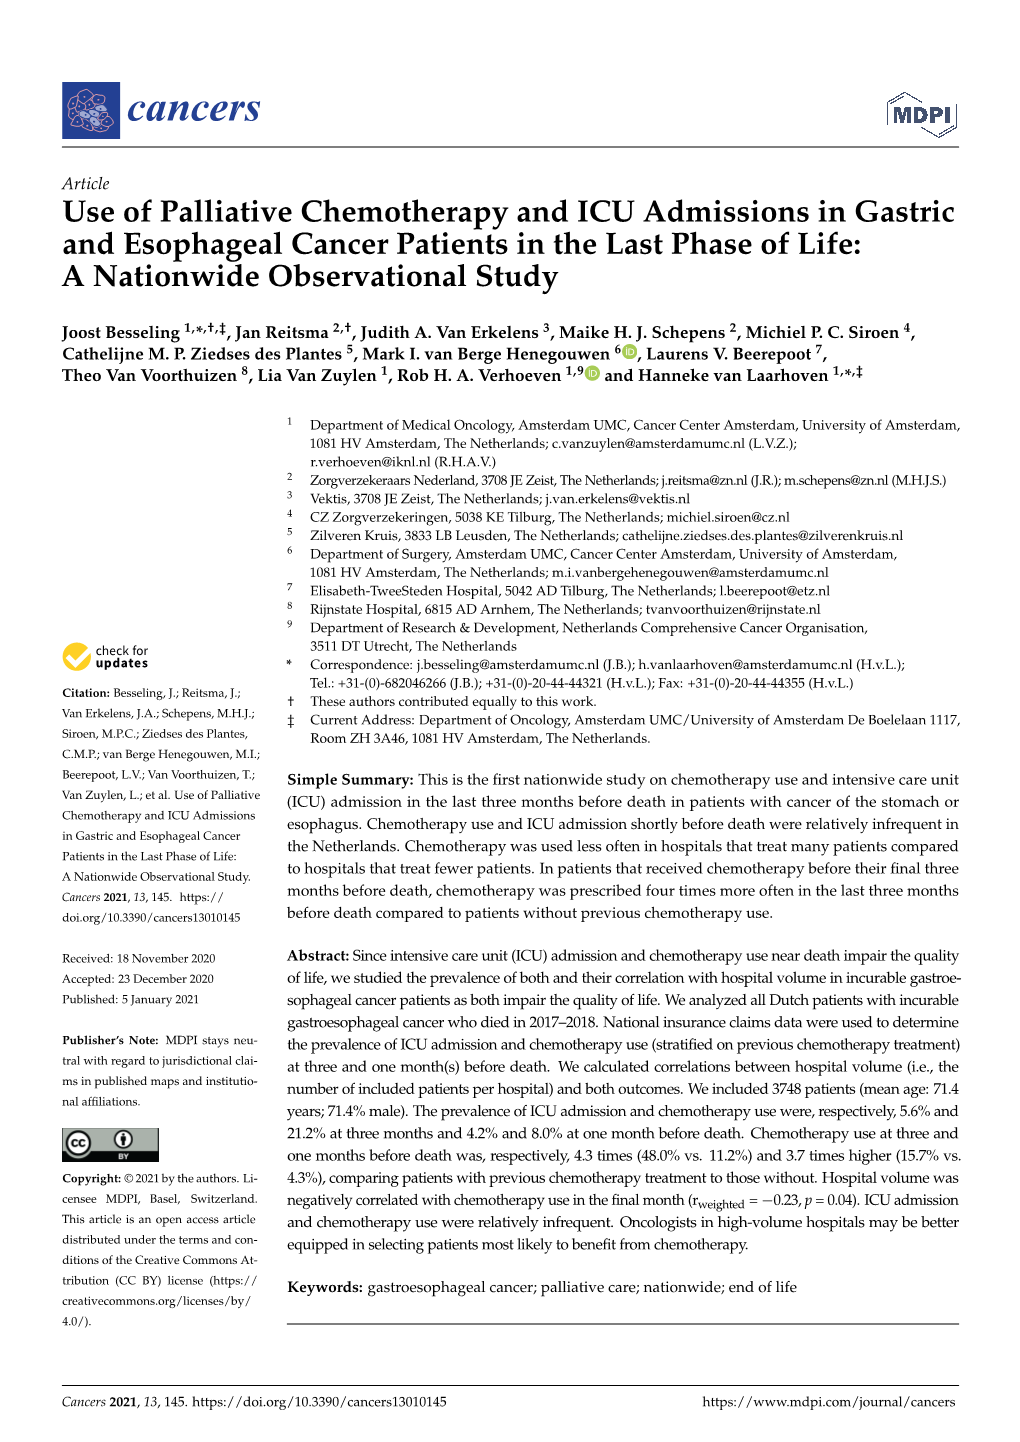 Use of Palliative Chemotherapy and ICU Admissions in Gastric and Esophageal Cancer Patients in the Last Phase of Life: a Nationwide Observational Study